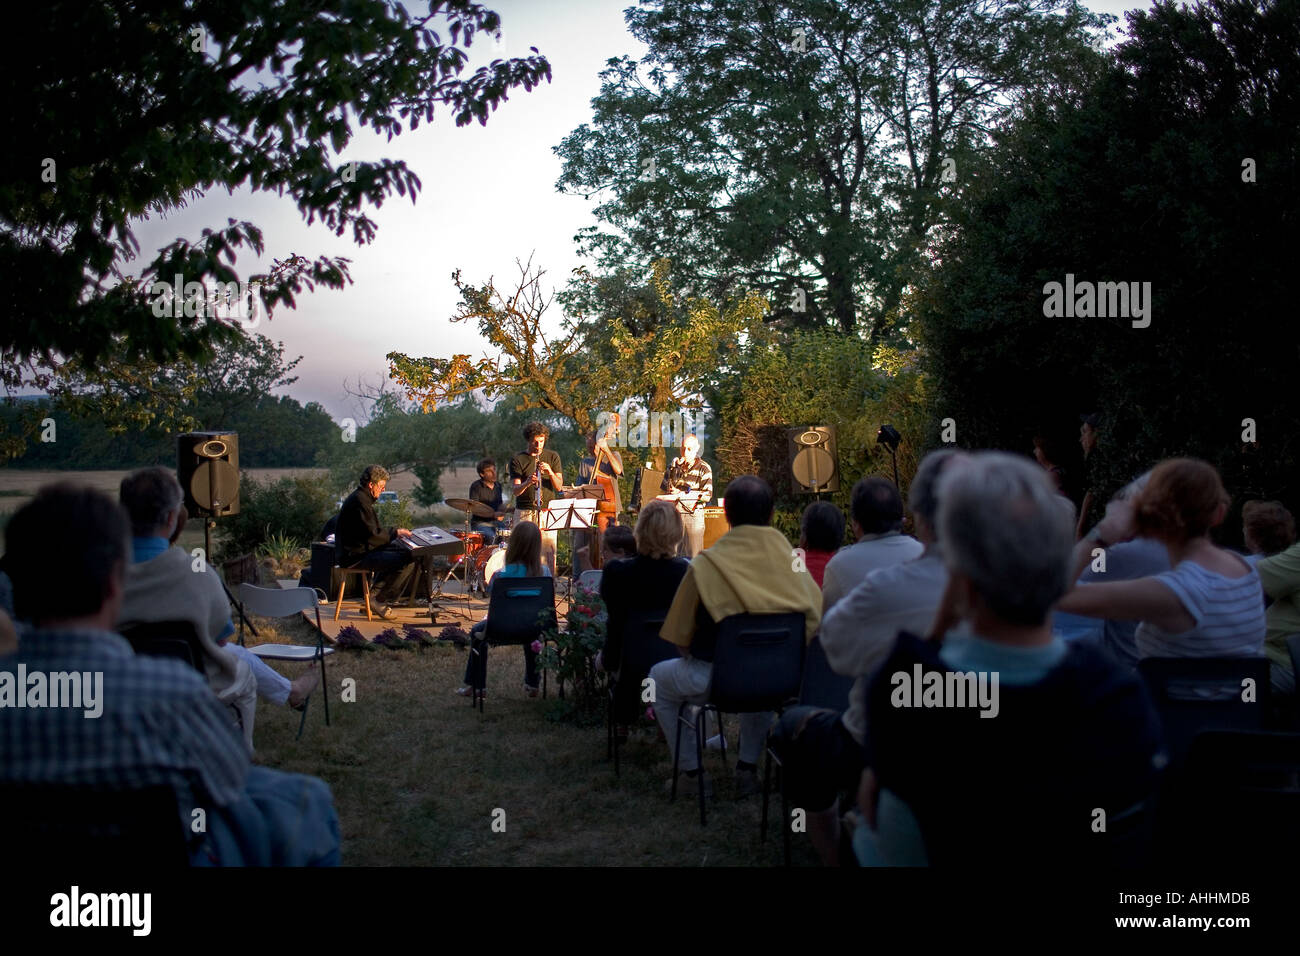 NIGHT JAZZ CONCERT AT THE FARM VAUCLUSE PROVENCE FRANCE EUROPE Stock Photo